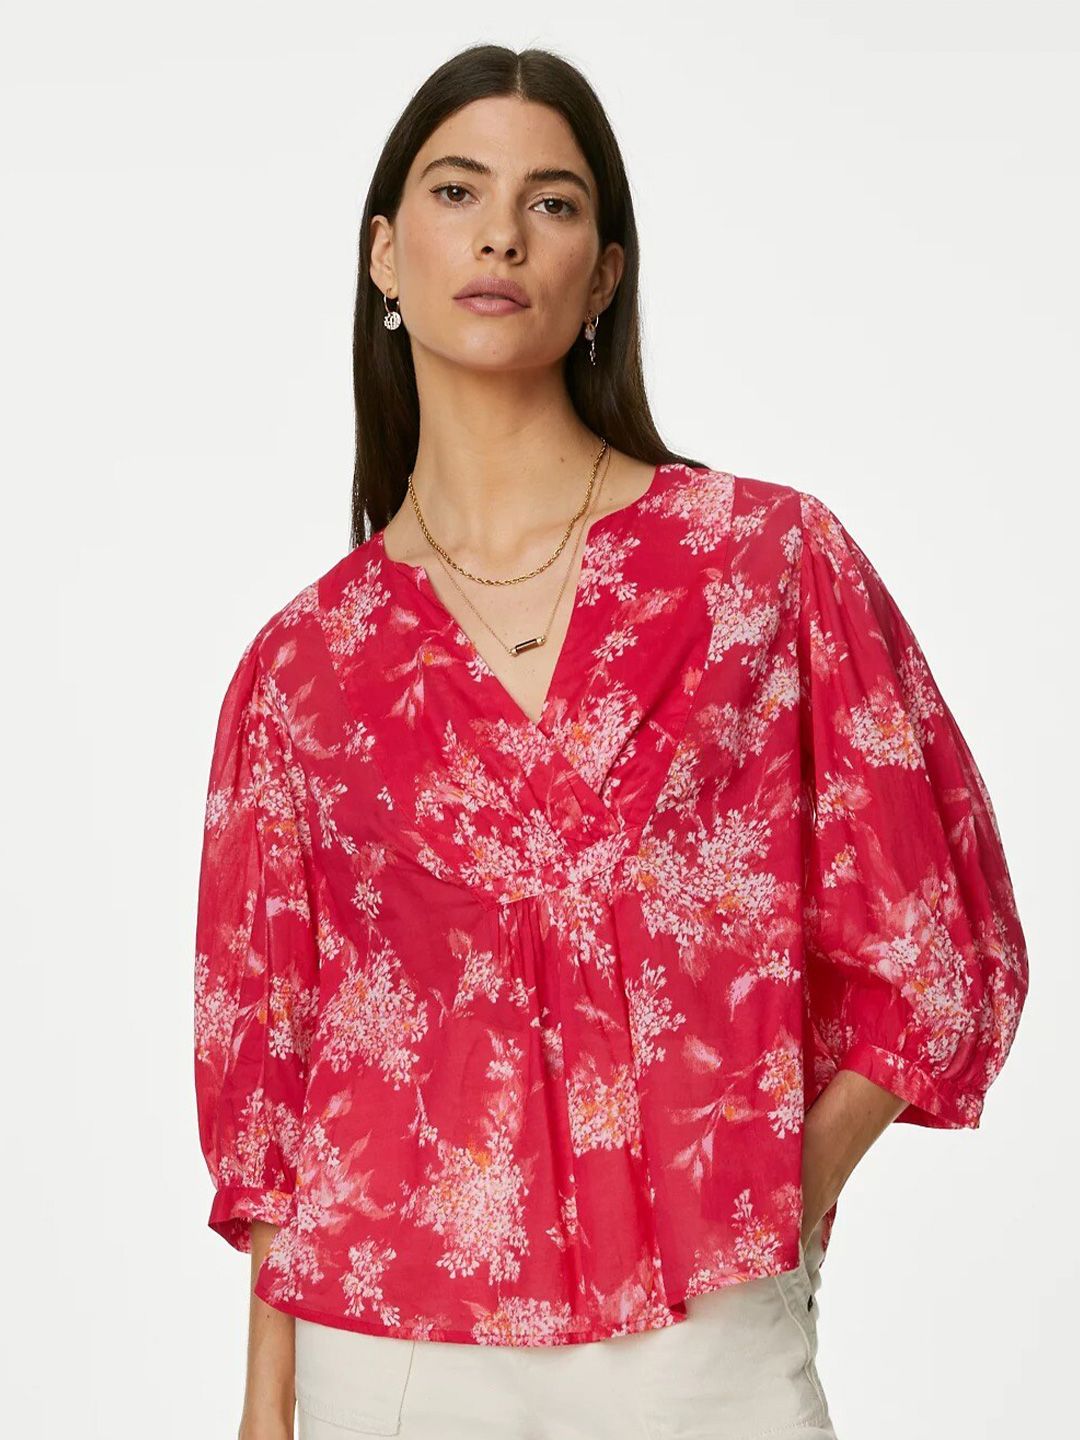 Marks & Spencer Floral Print Cotton Top Price in India